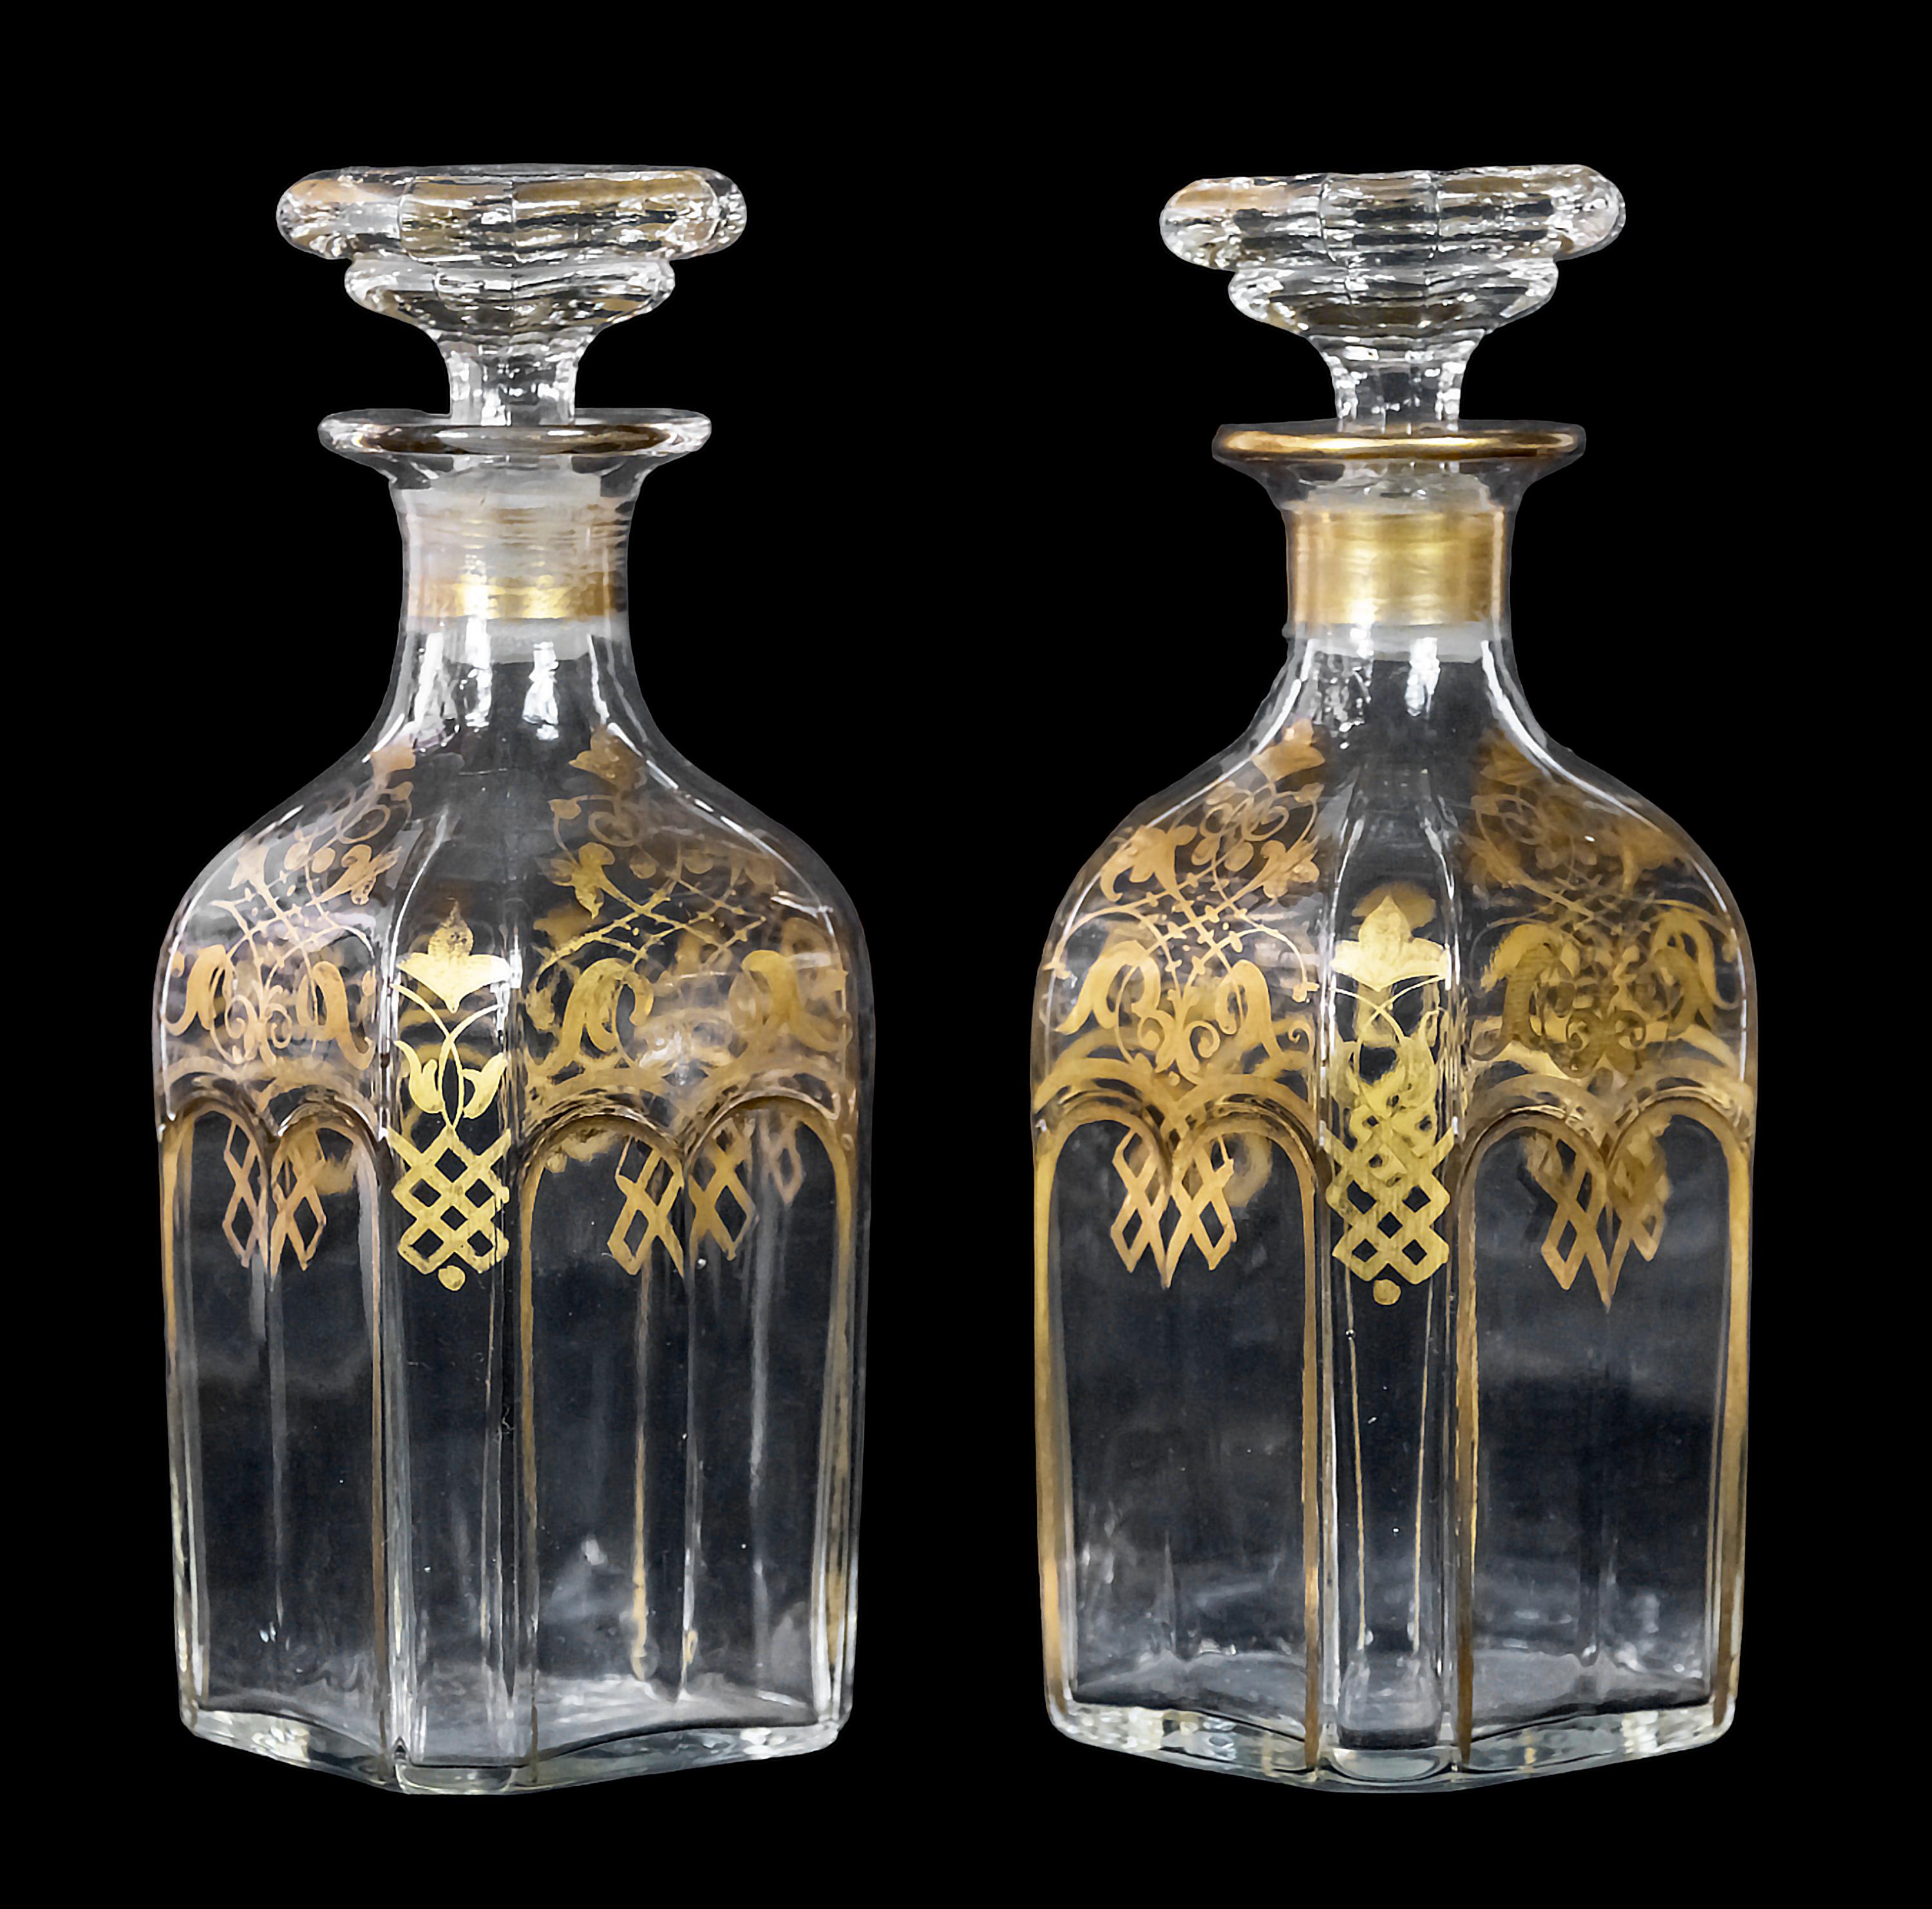 Gilt Pair of Antique Napoleon III Baccarat Crystal Square Decanters For Sale